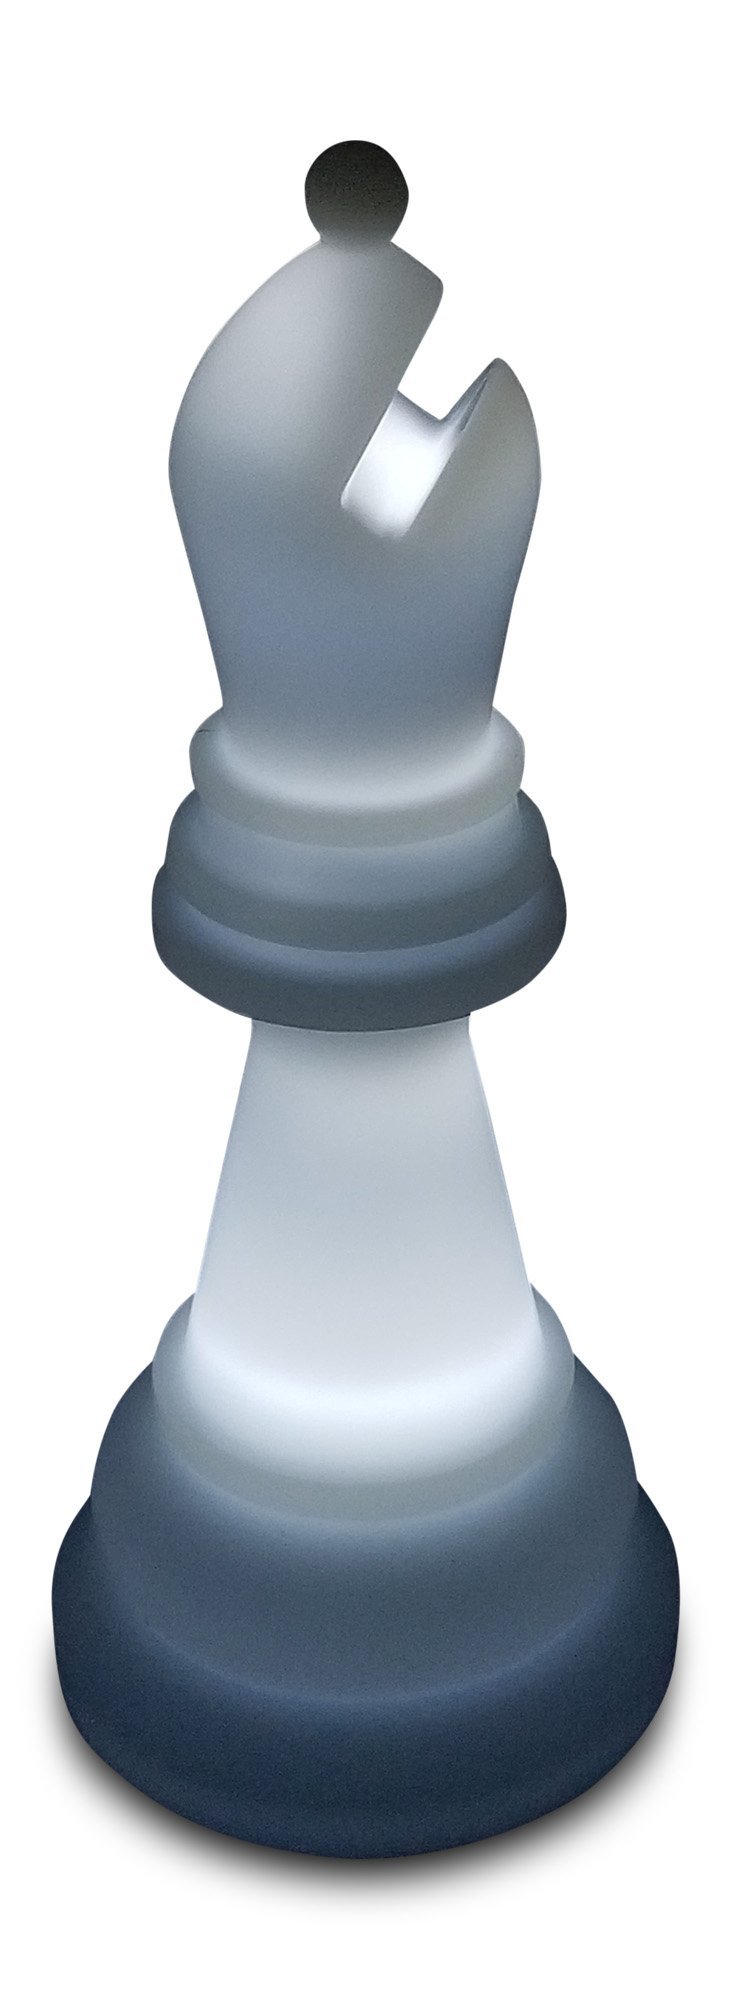 MegaChess 28 Inch Perfect Bishop Light-Up Giant Chess Piece - White | Default Title | MegaChess.com